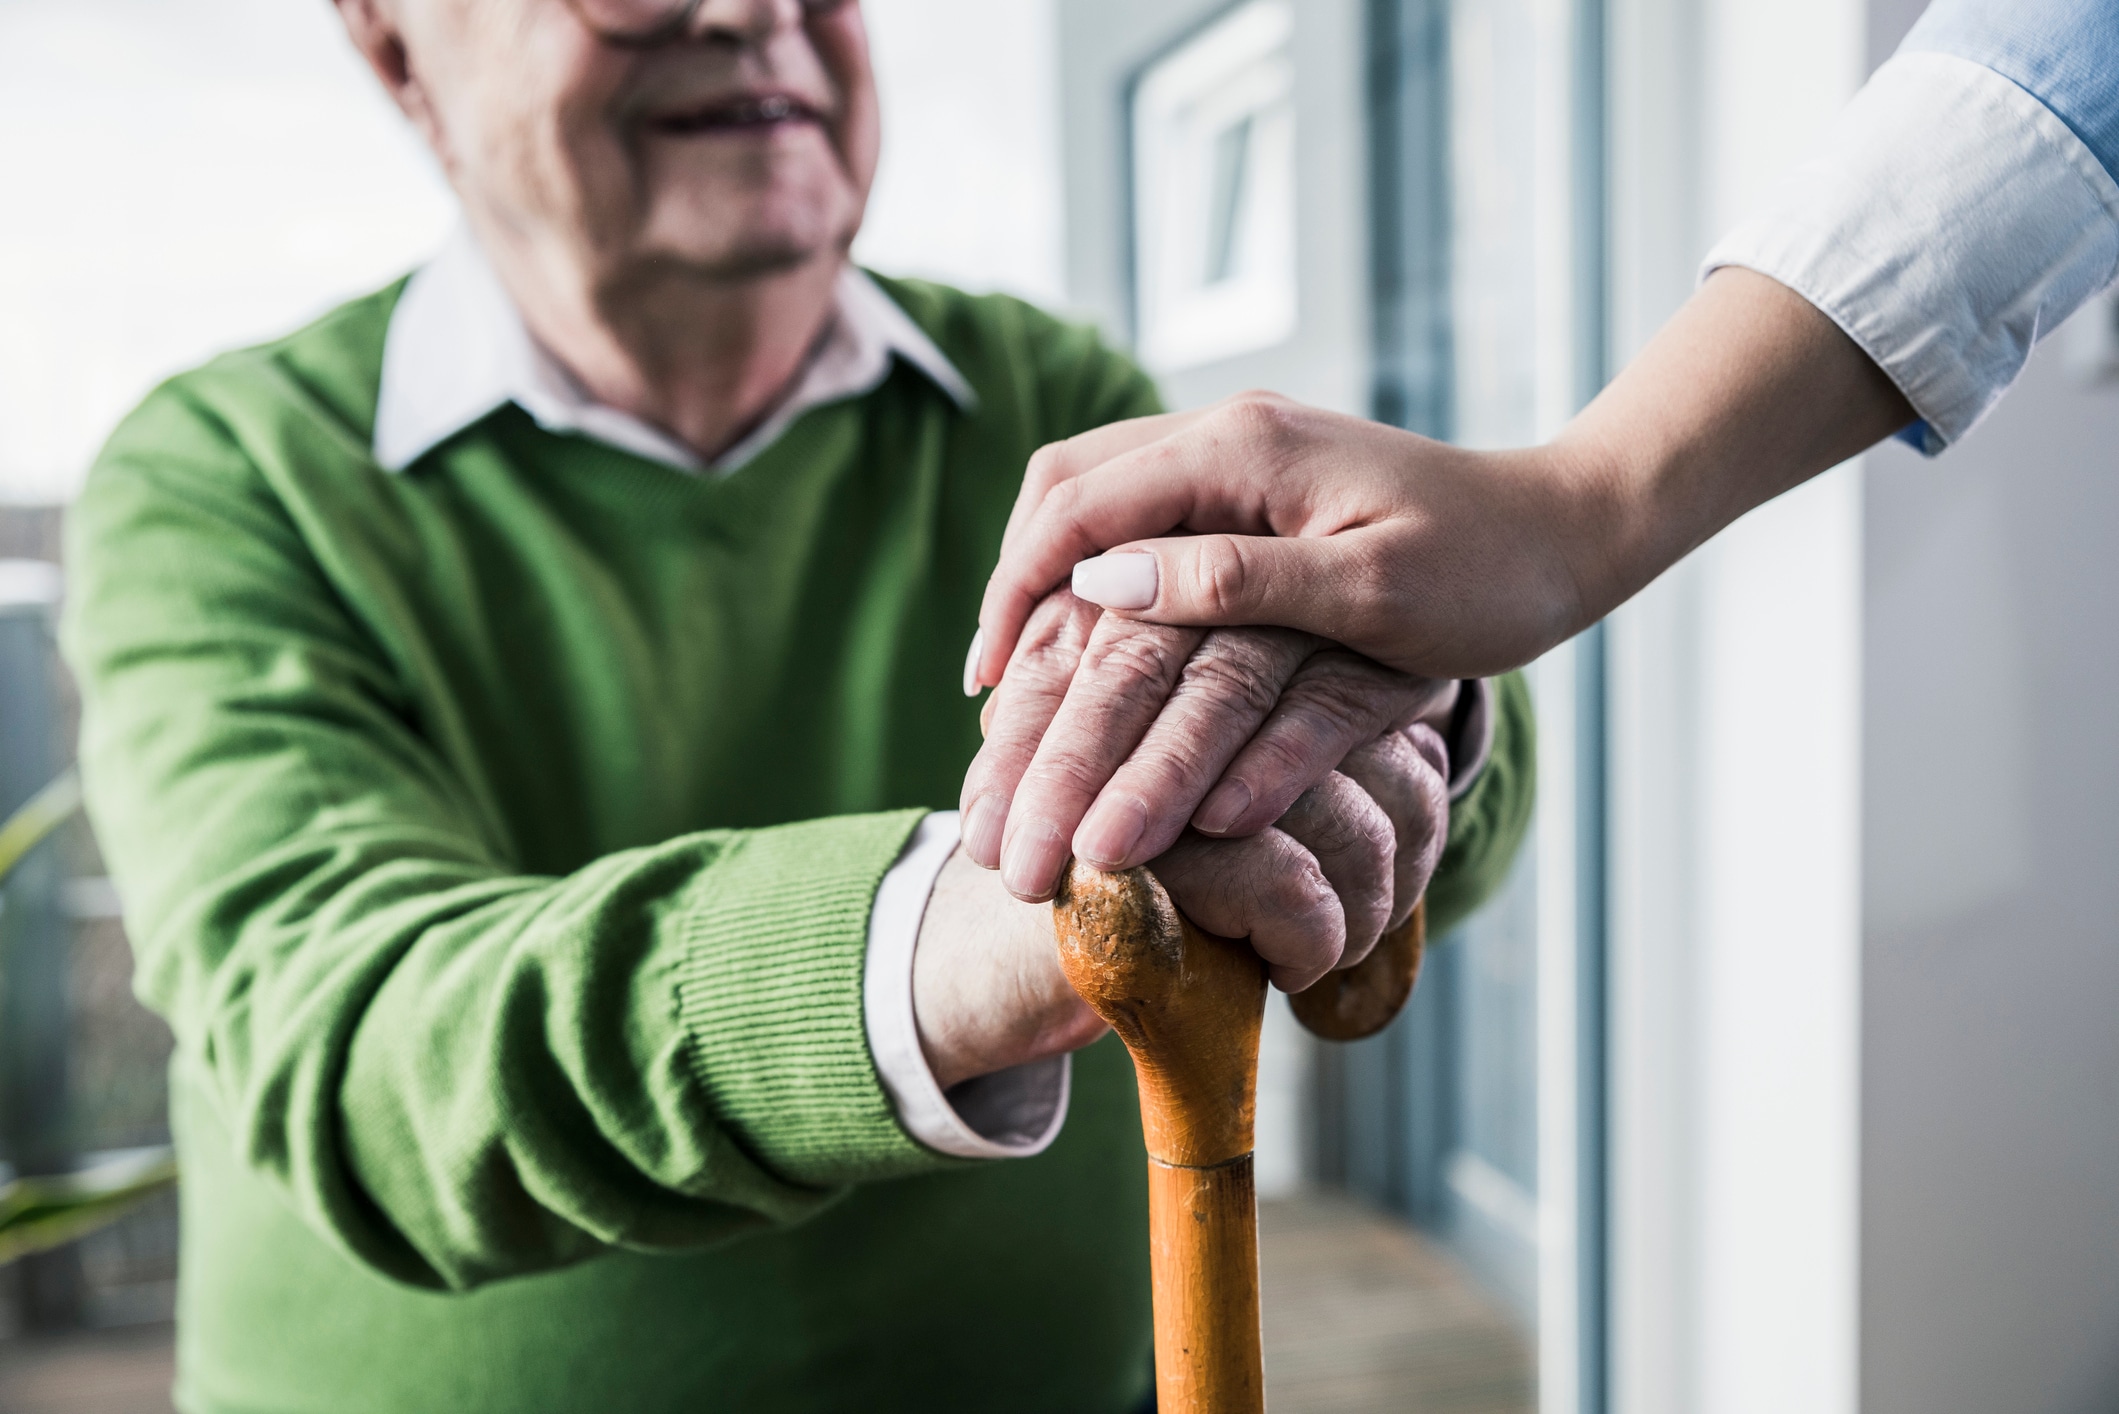 Understanding respite care: What is it and options available